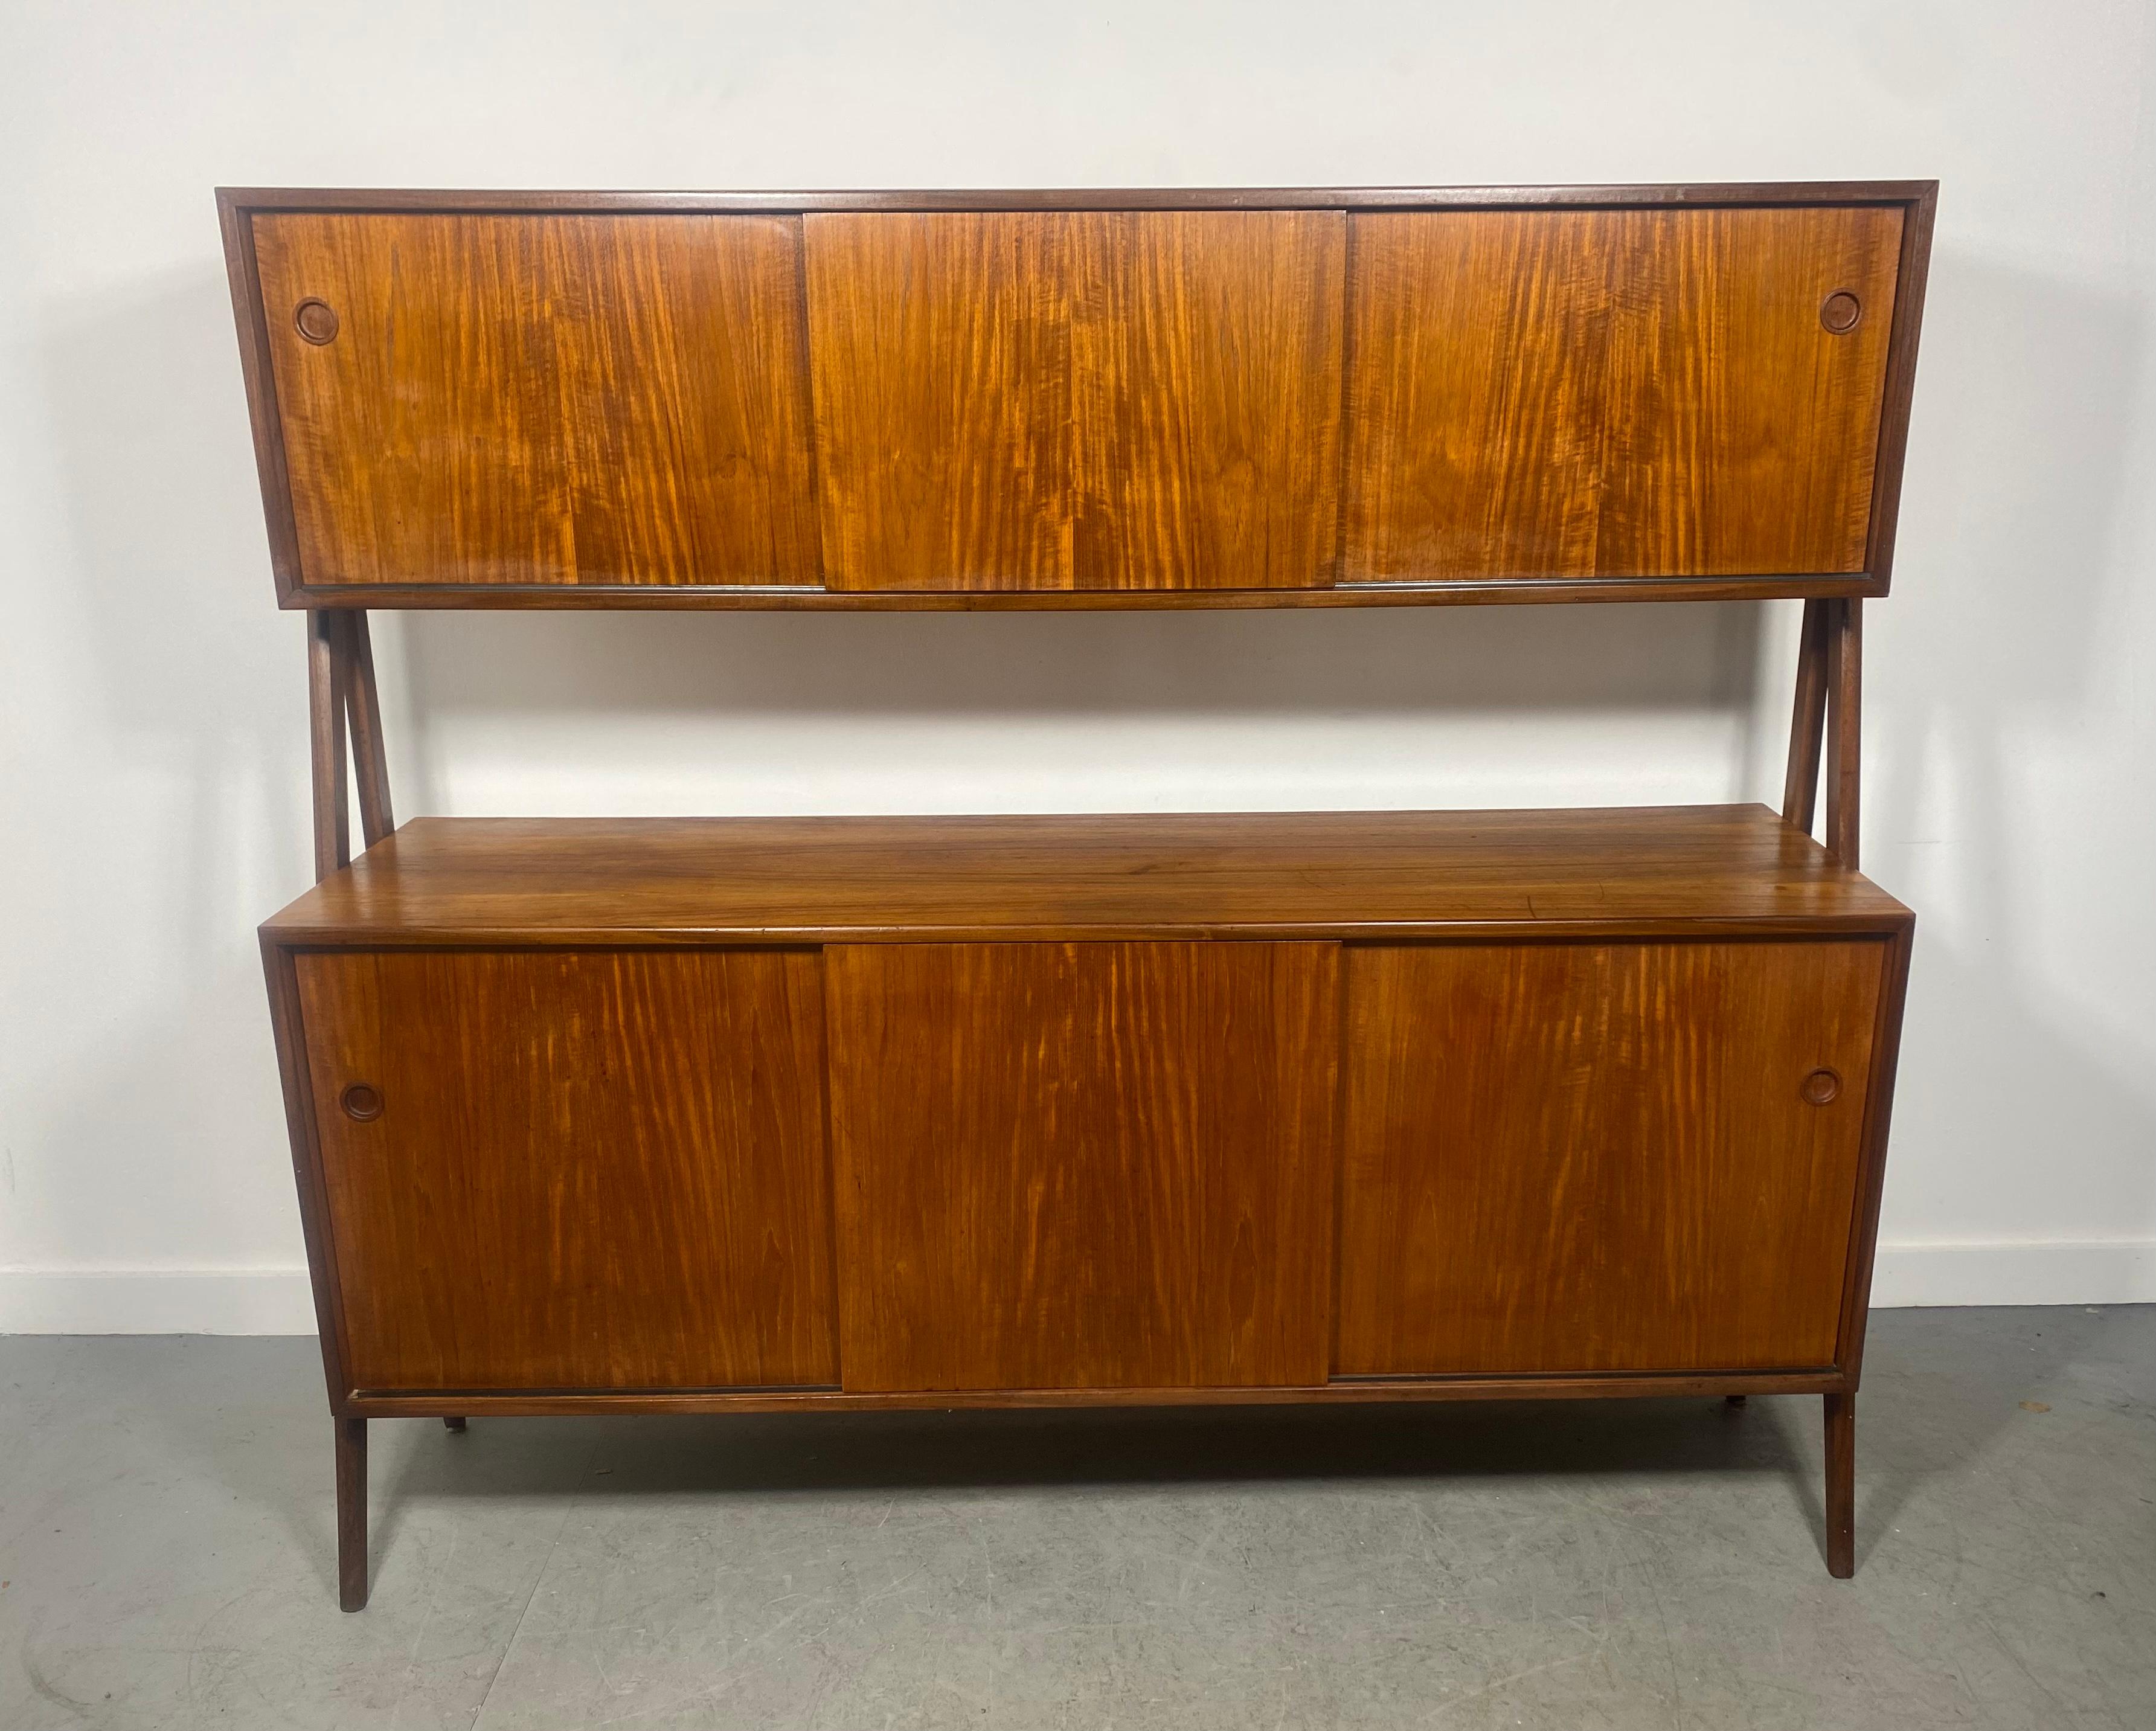 Two Tier Mid-Century Modern Sideboard Credenza Hutch In Teak and Oak by Randers Mobelfabrik in rich teak with solid oak supports. These two wood types create such a wonderful contrast to each other. The case offers a variety of storage options on